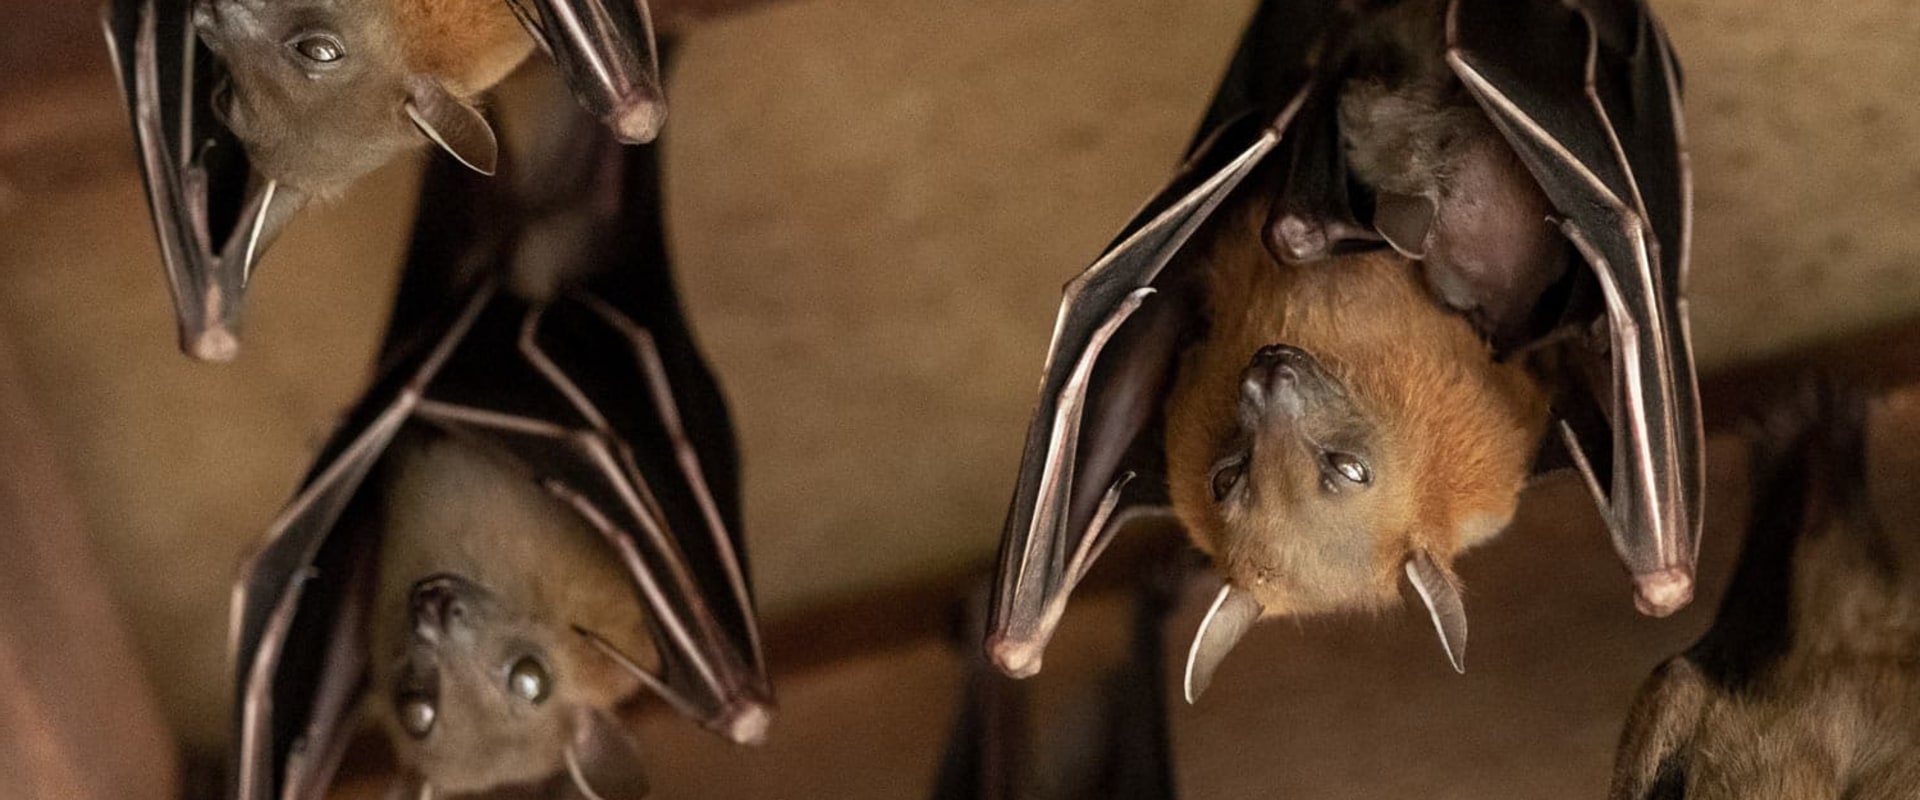 Do bats move around in the attic during the day?